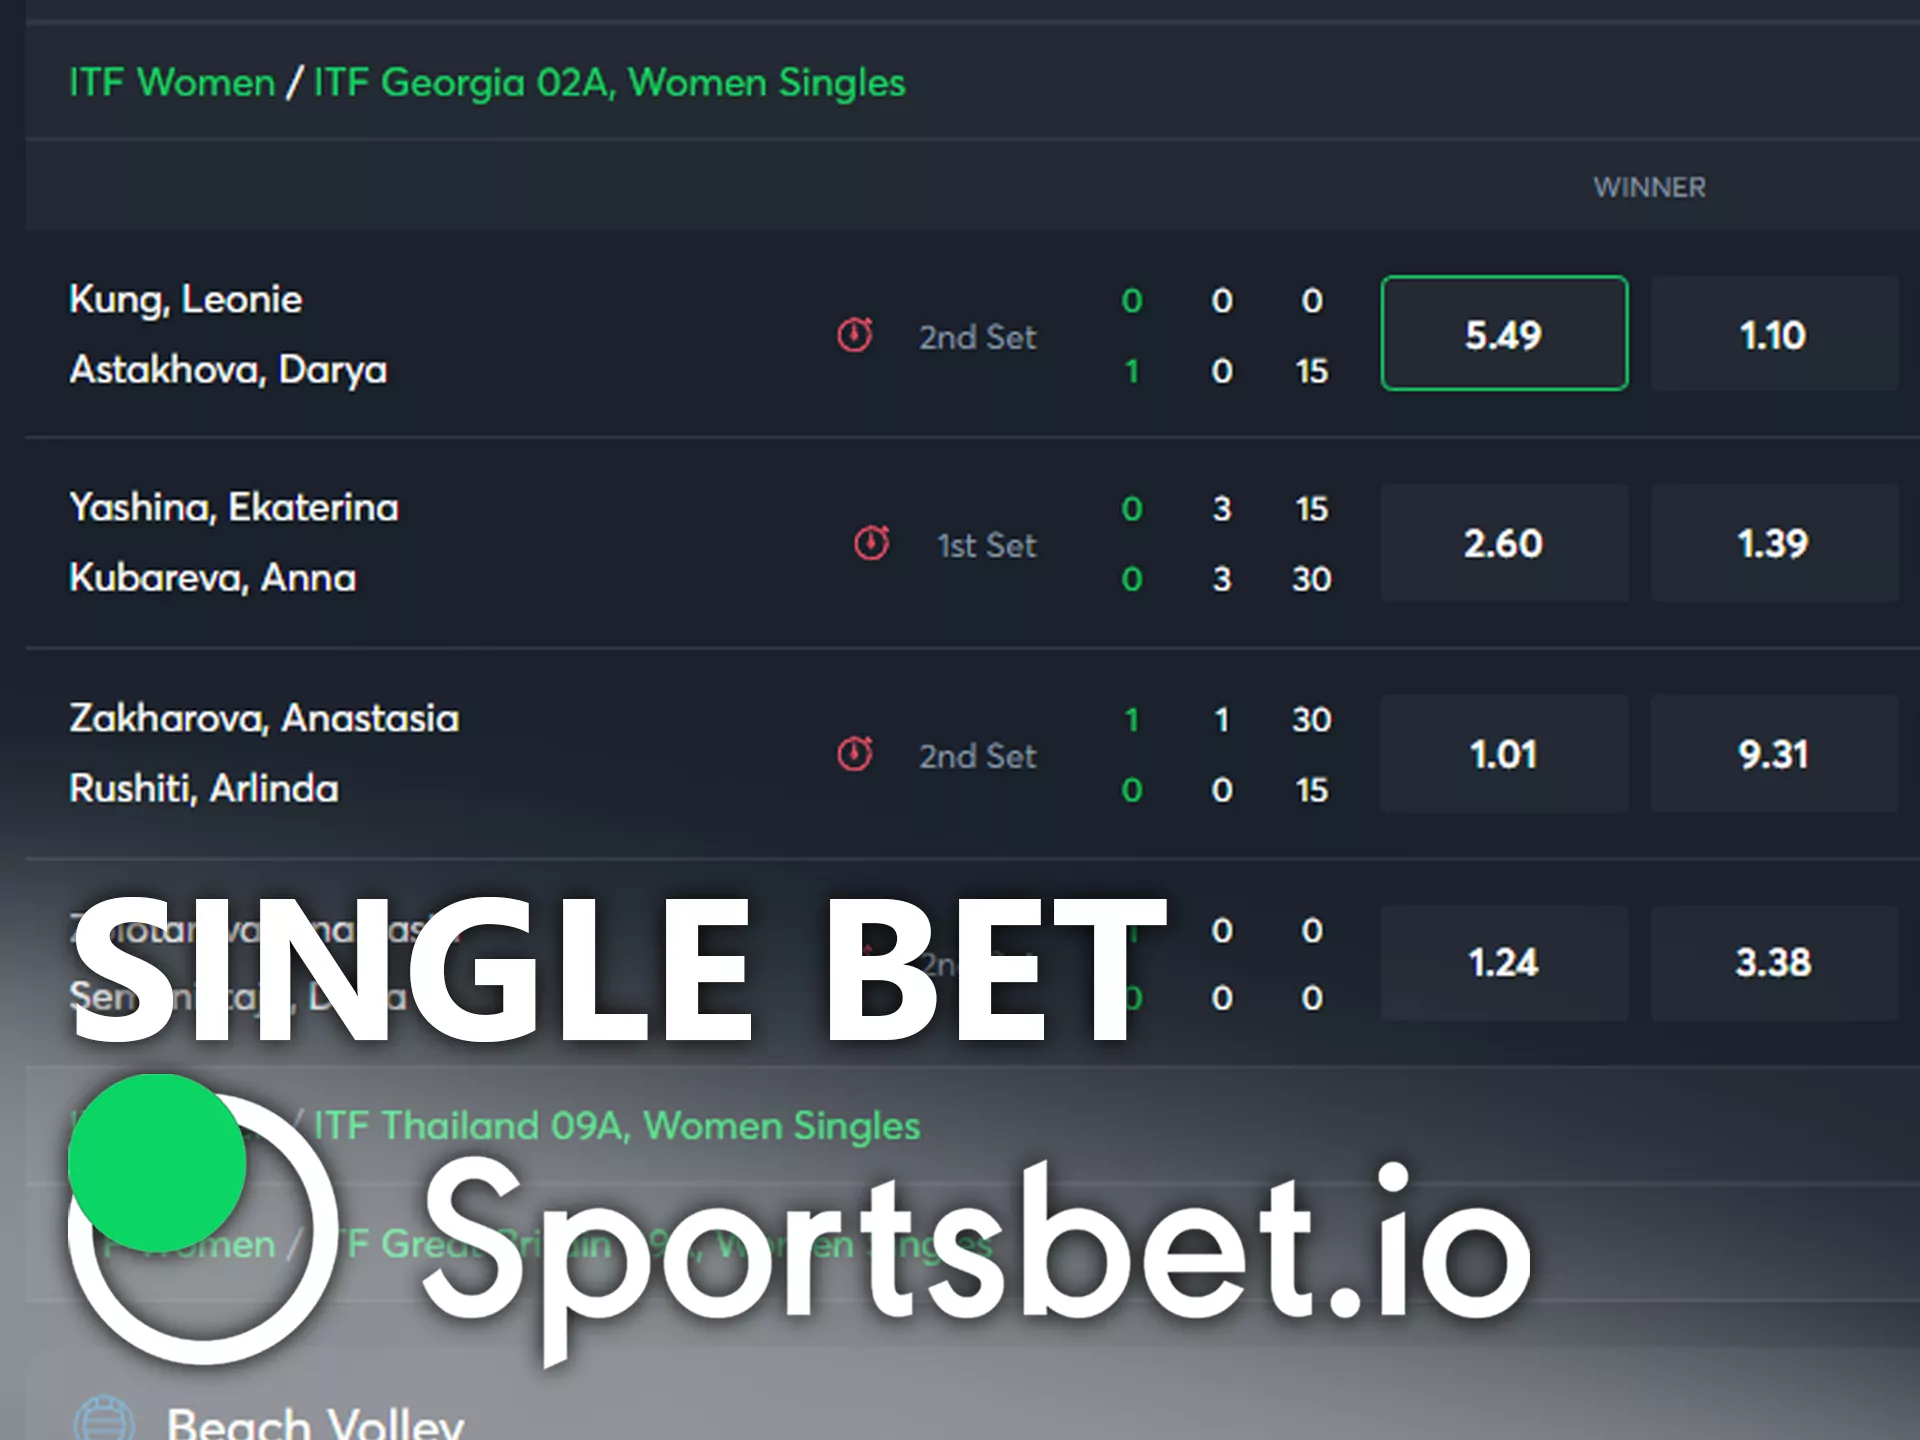 Place the single bets if you are nre at Spostsbet.